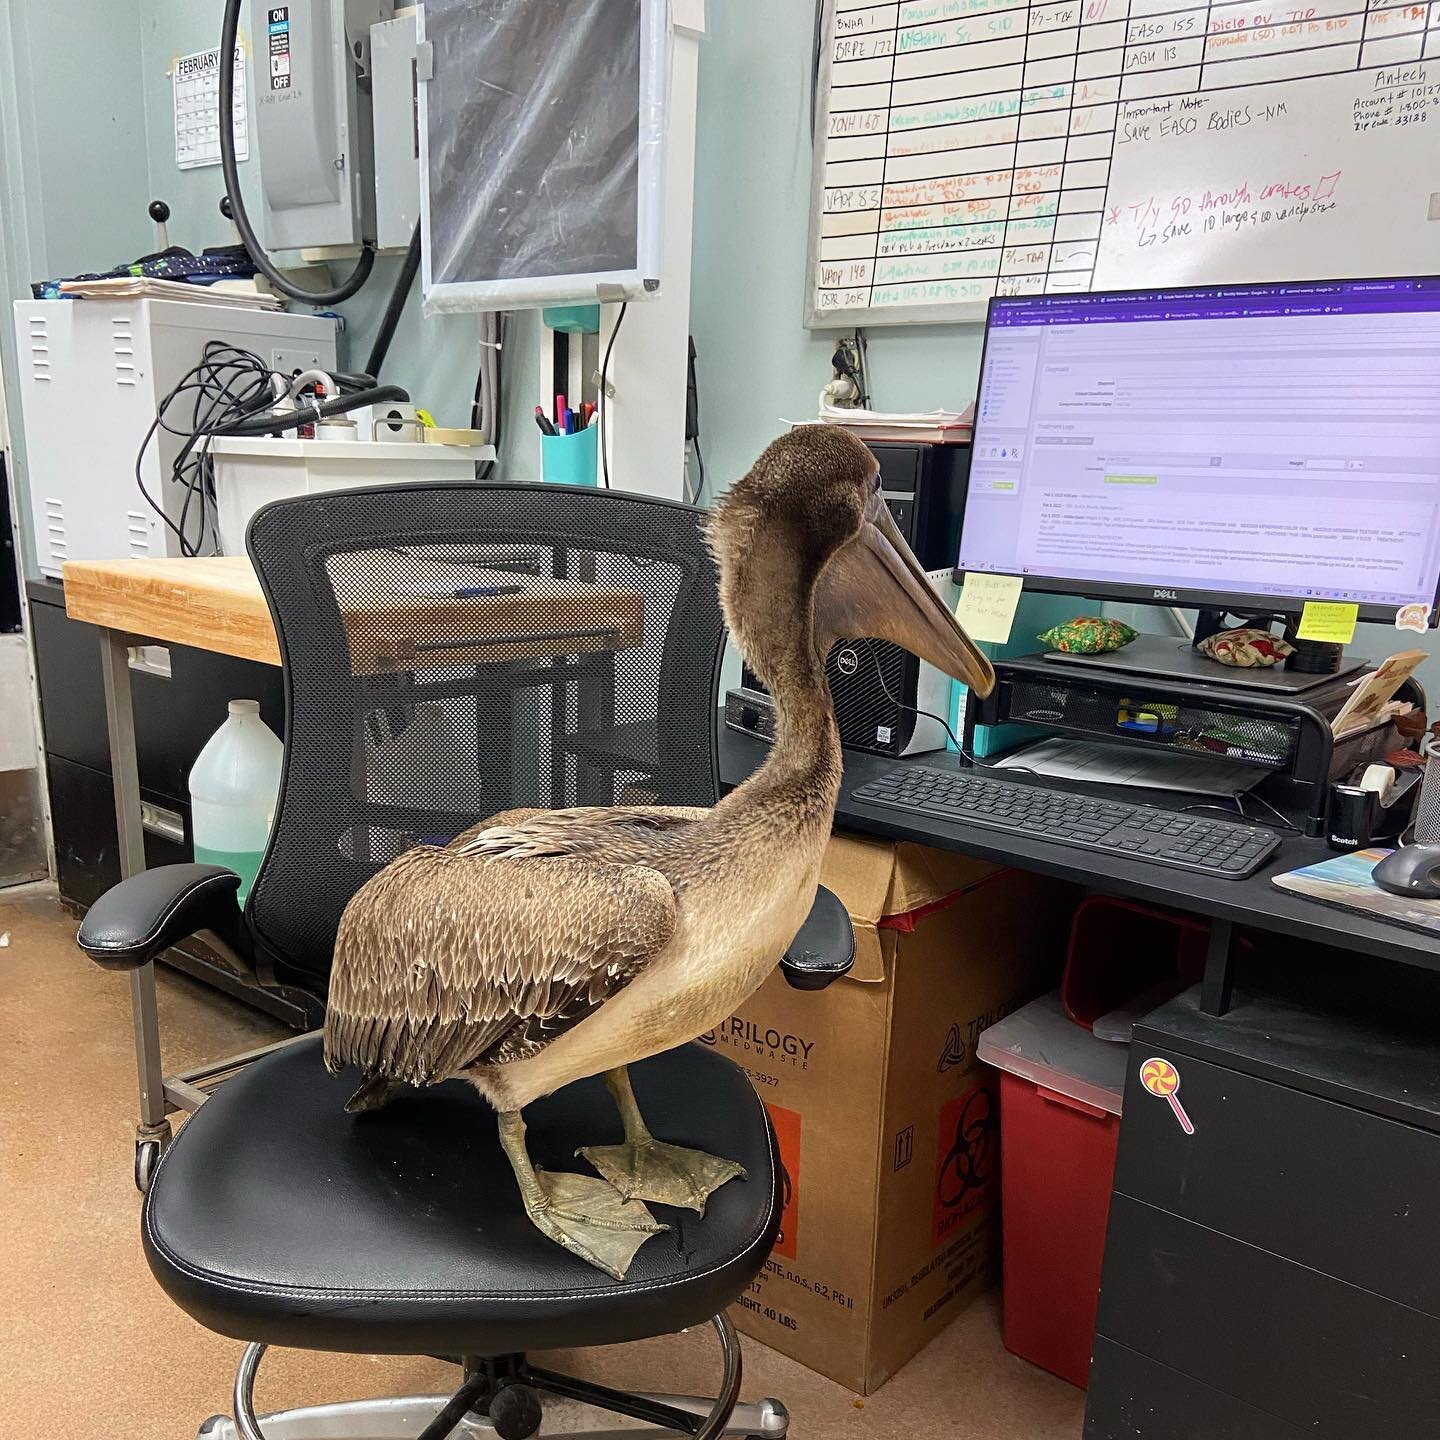 This juvenile Brown Pelican decided to check out his treatment plan while doing some &ldquo;self-PT&rdquo; around the clinic!